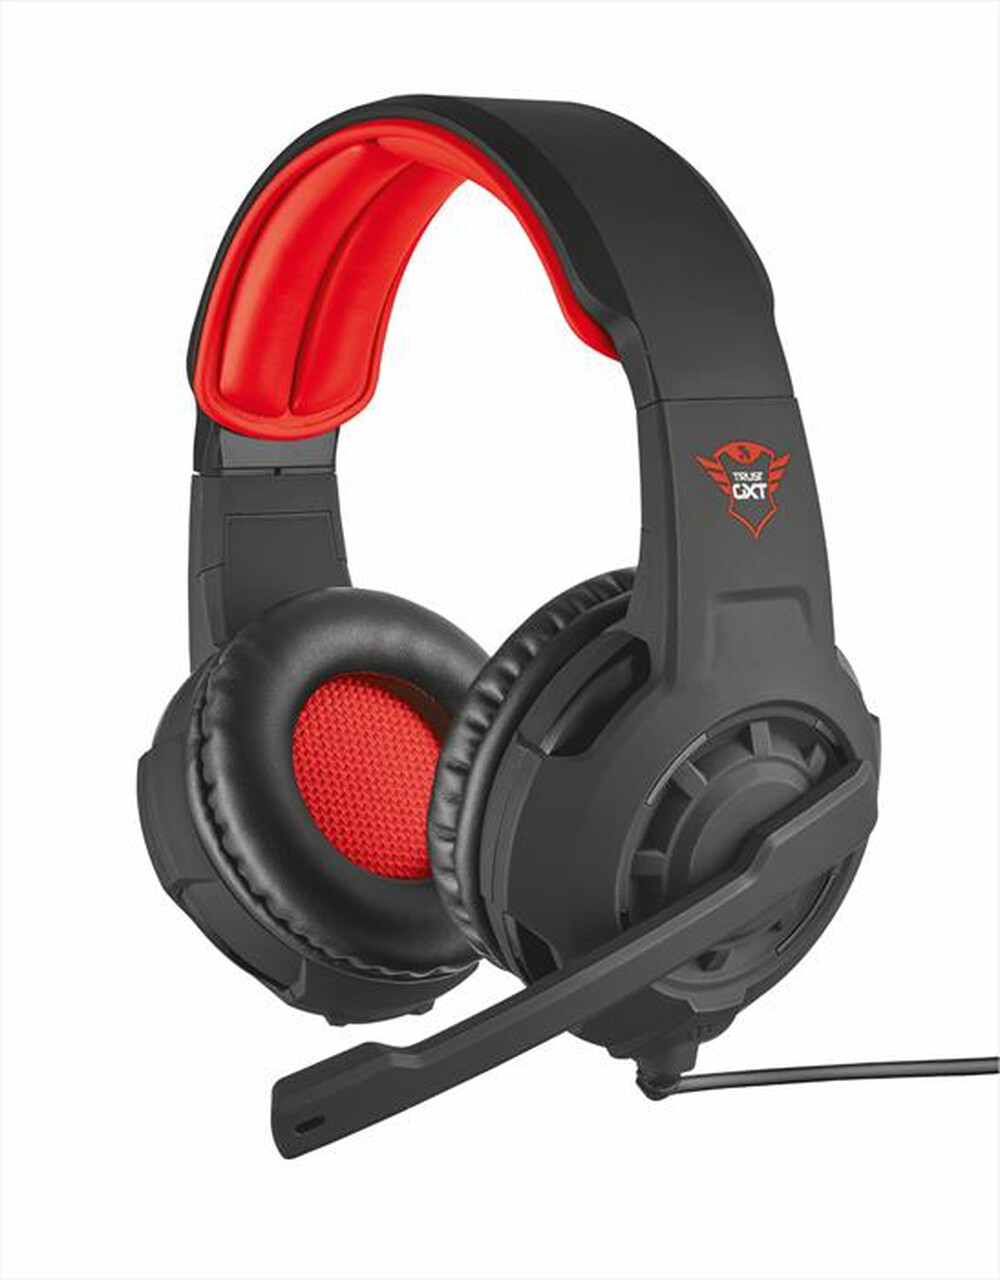 "TRUST - GXT310 GAMING HEADSET"